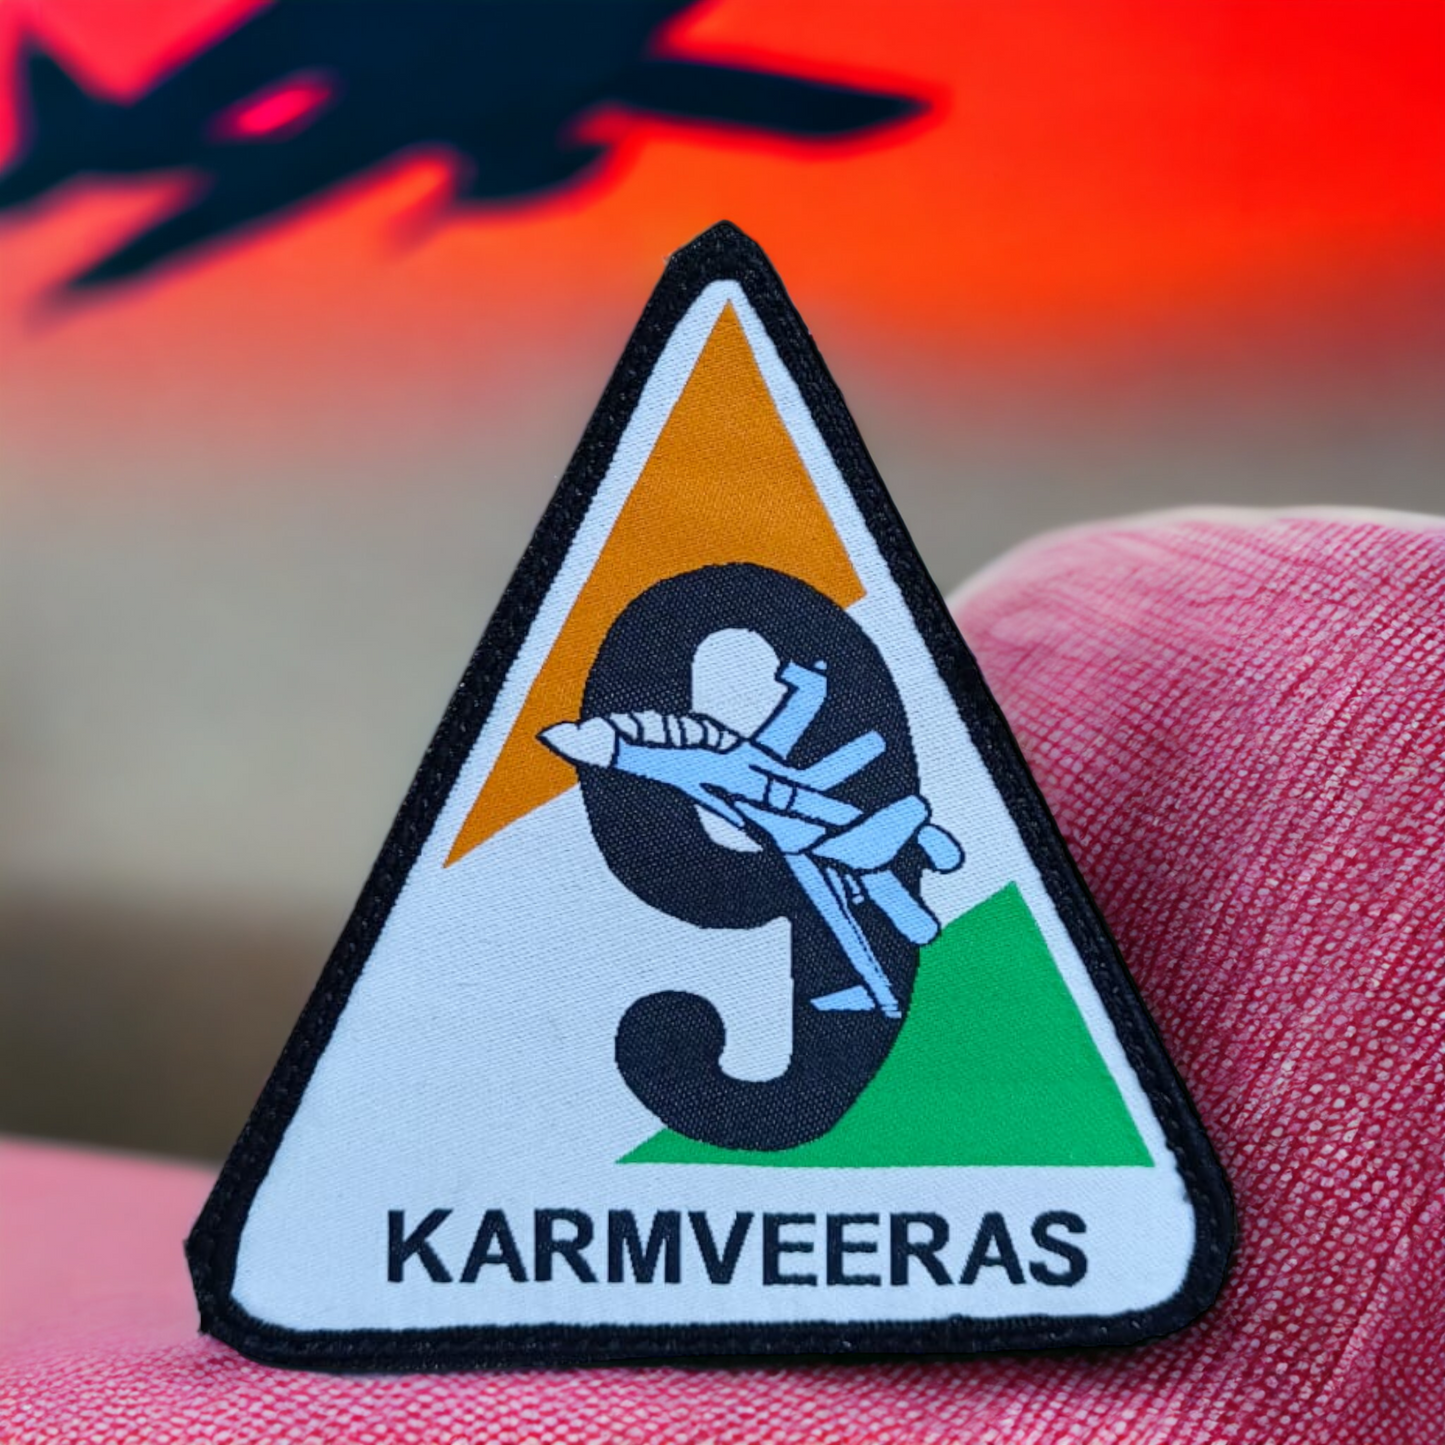 karamveeras velcro patches for jackets